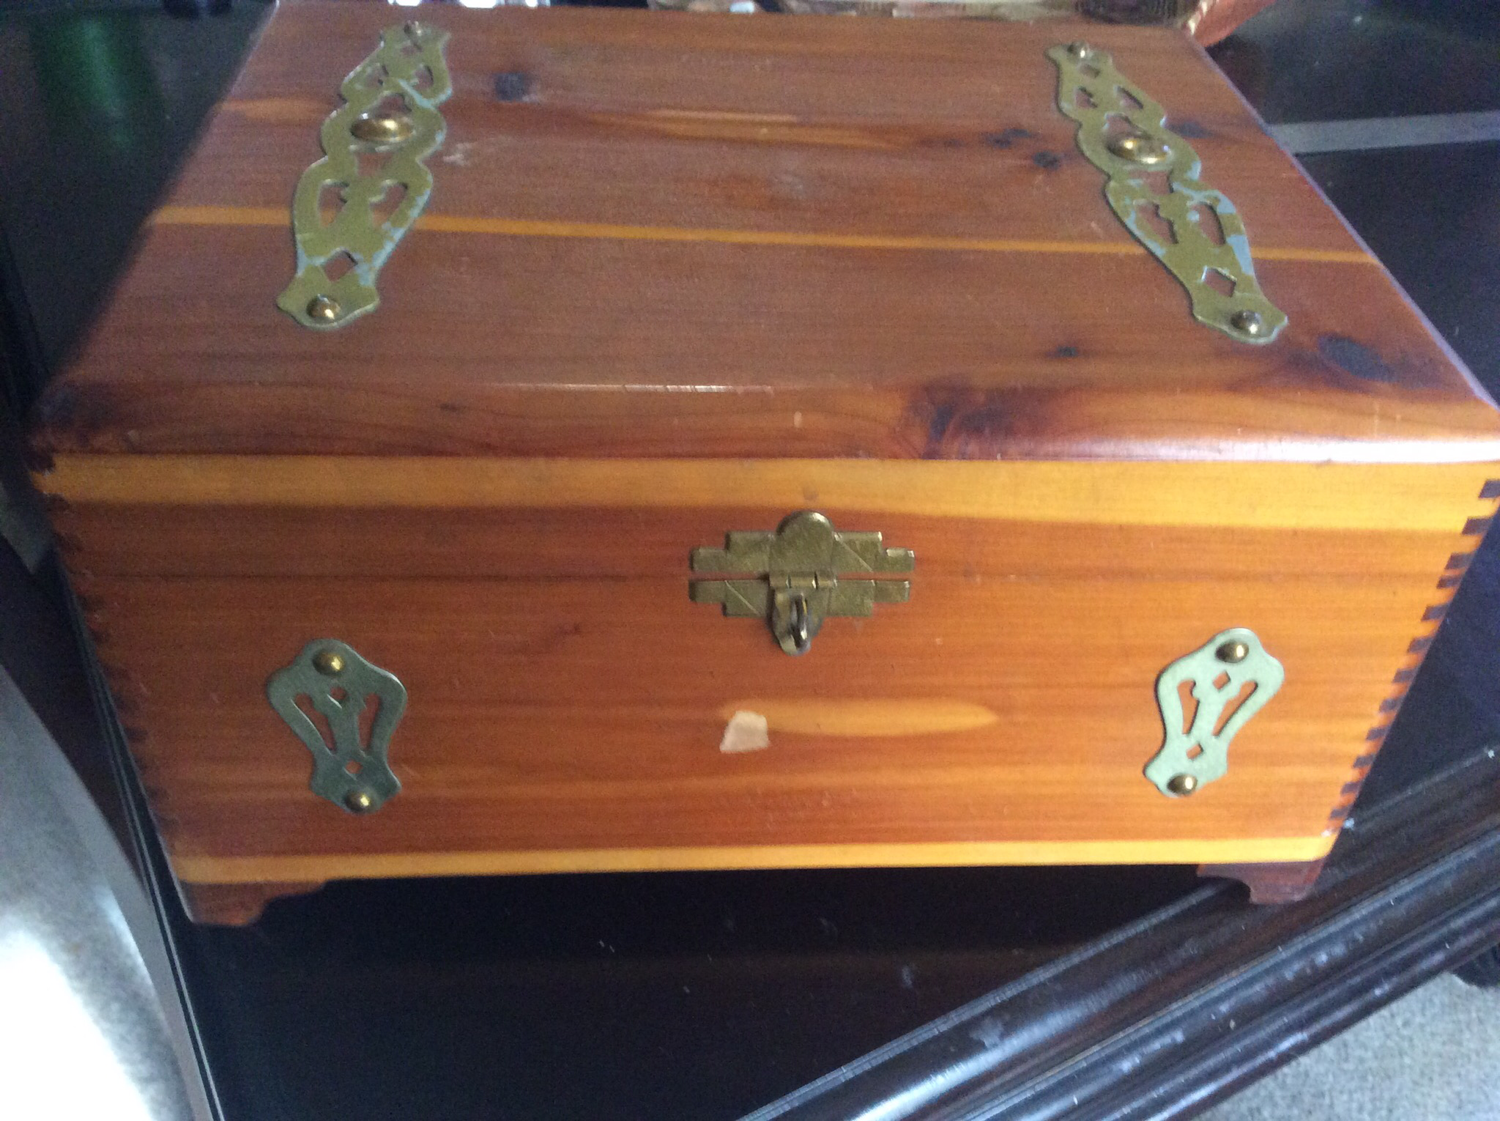 Cedar Djinn box keep tabernacles of Djinns in while they are fulfilling thy wishes to be granted 